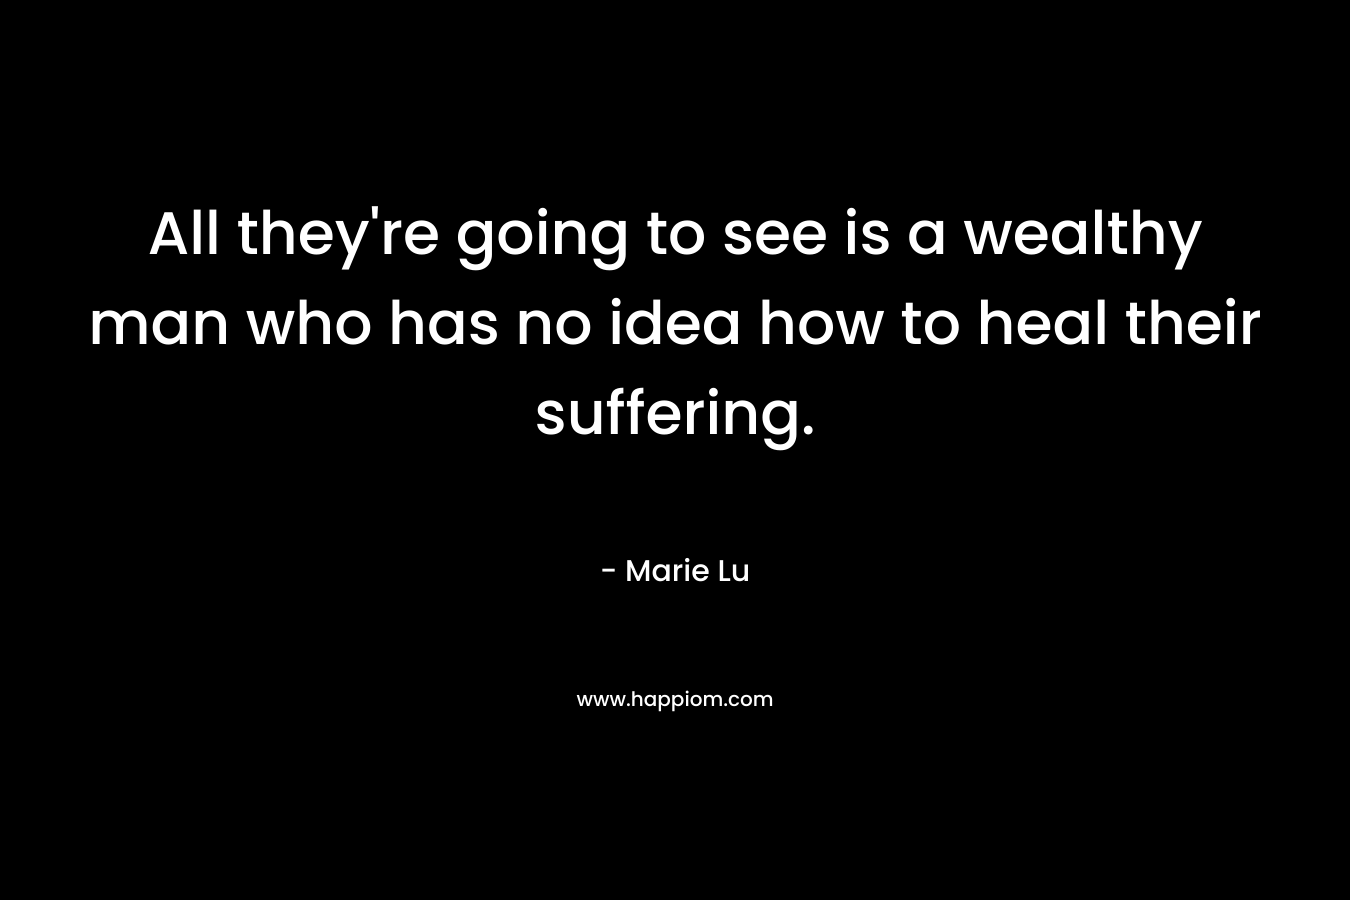 All they’re going to see is a wealthy man who has no idea how to heal their suffering. – Marie Lu